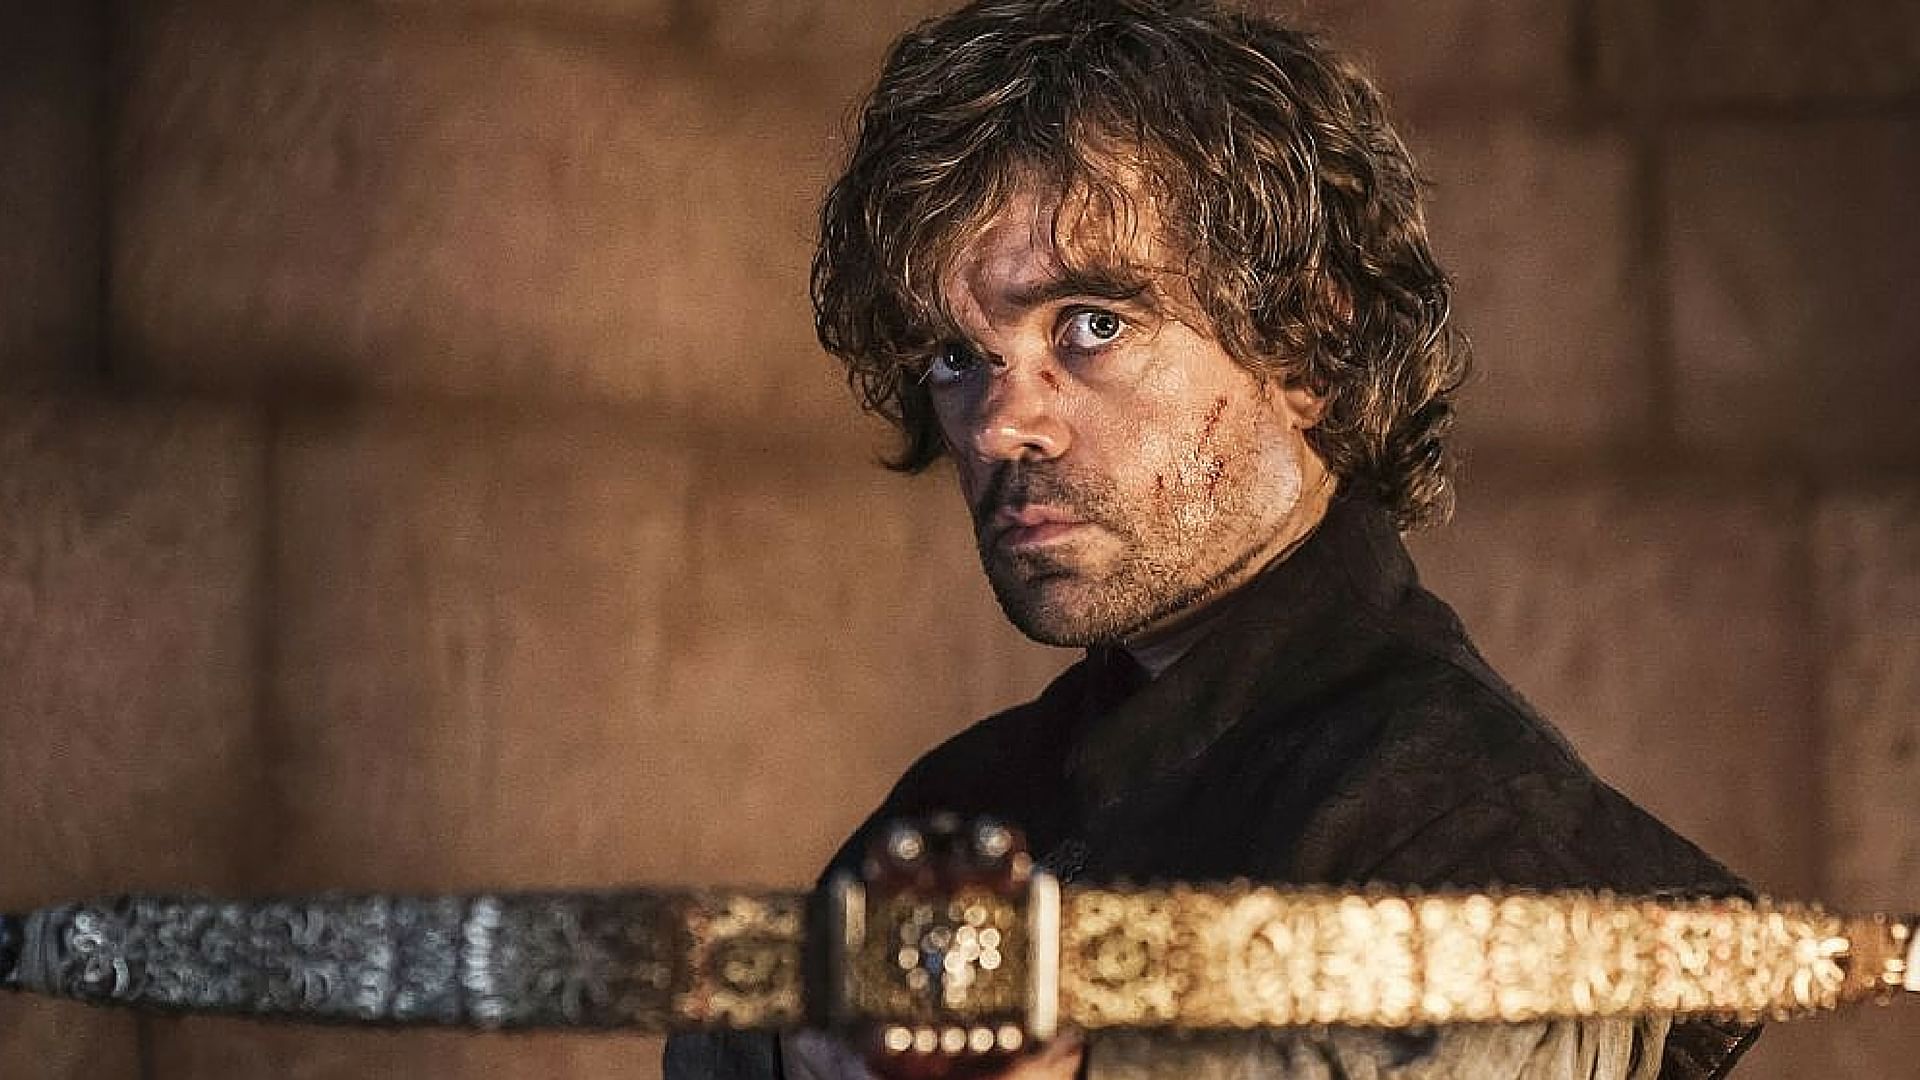 Peter Dinklage as Tyrion Lannister in  the <i>Game of Thrones</i> (Photo Courtesy: Twitter)